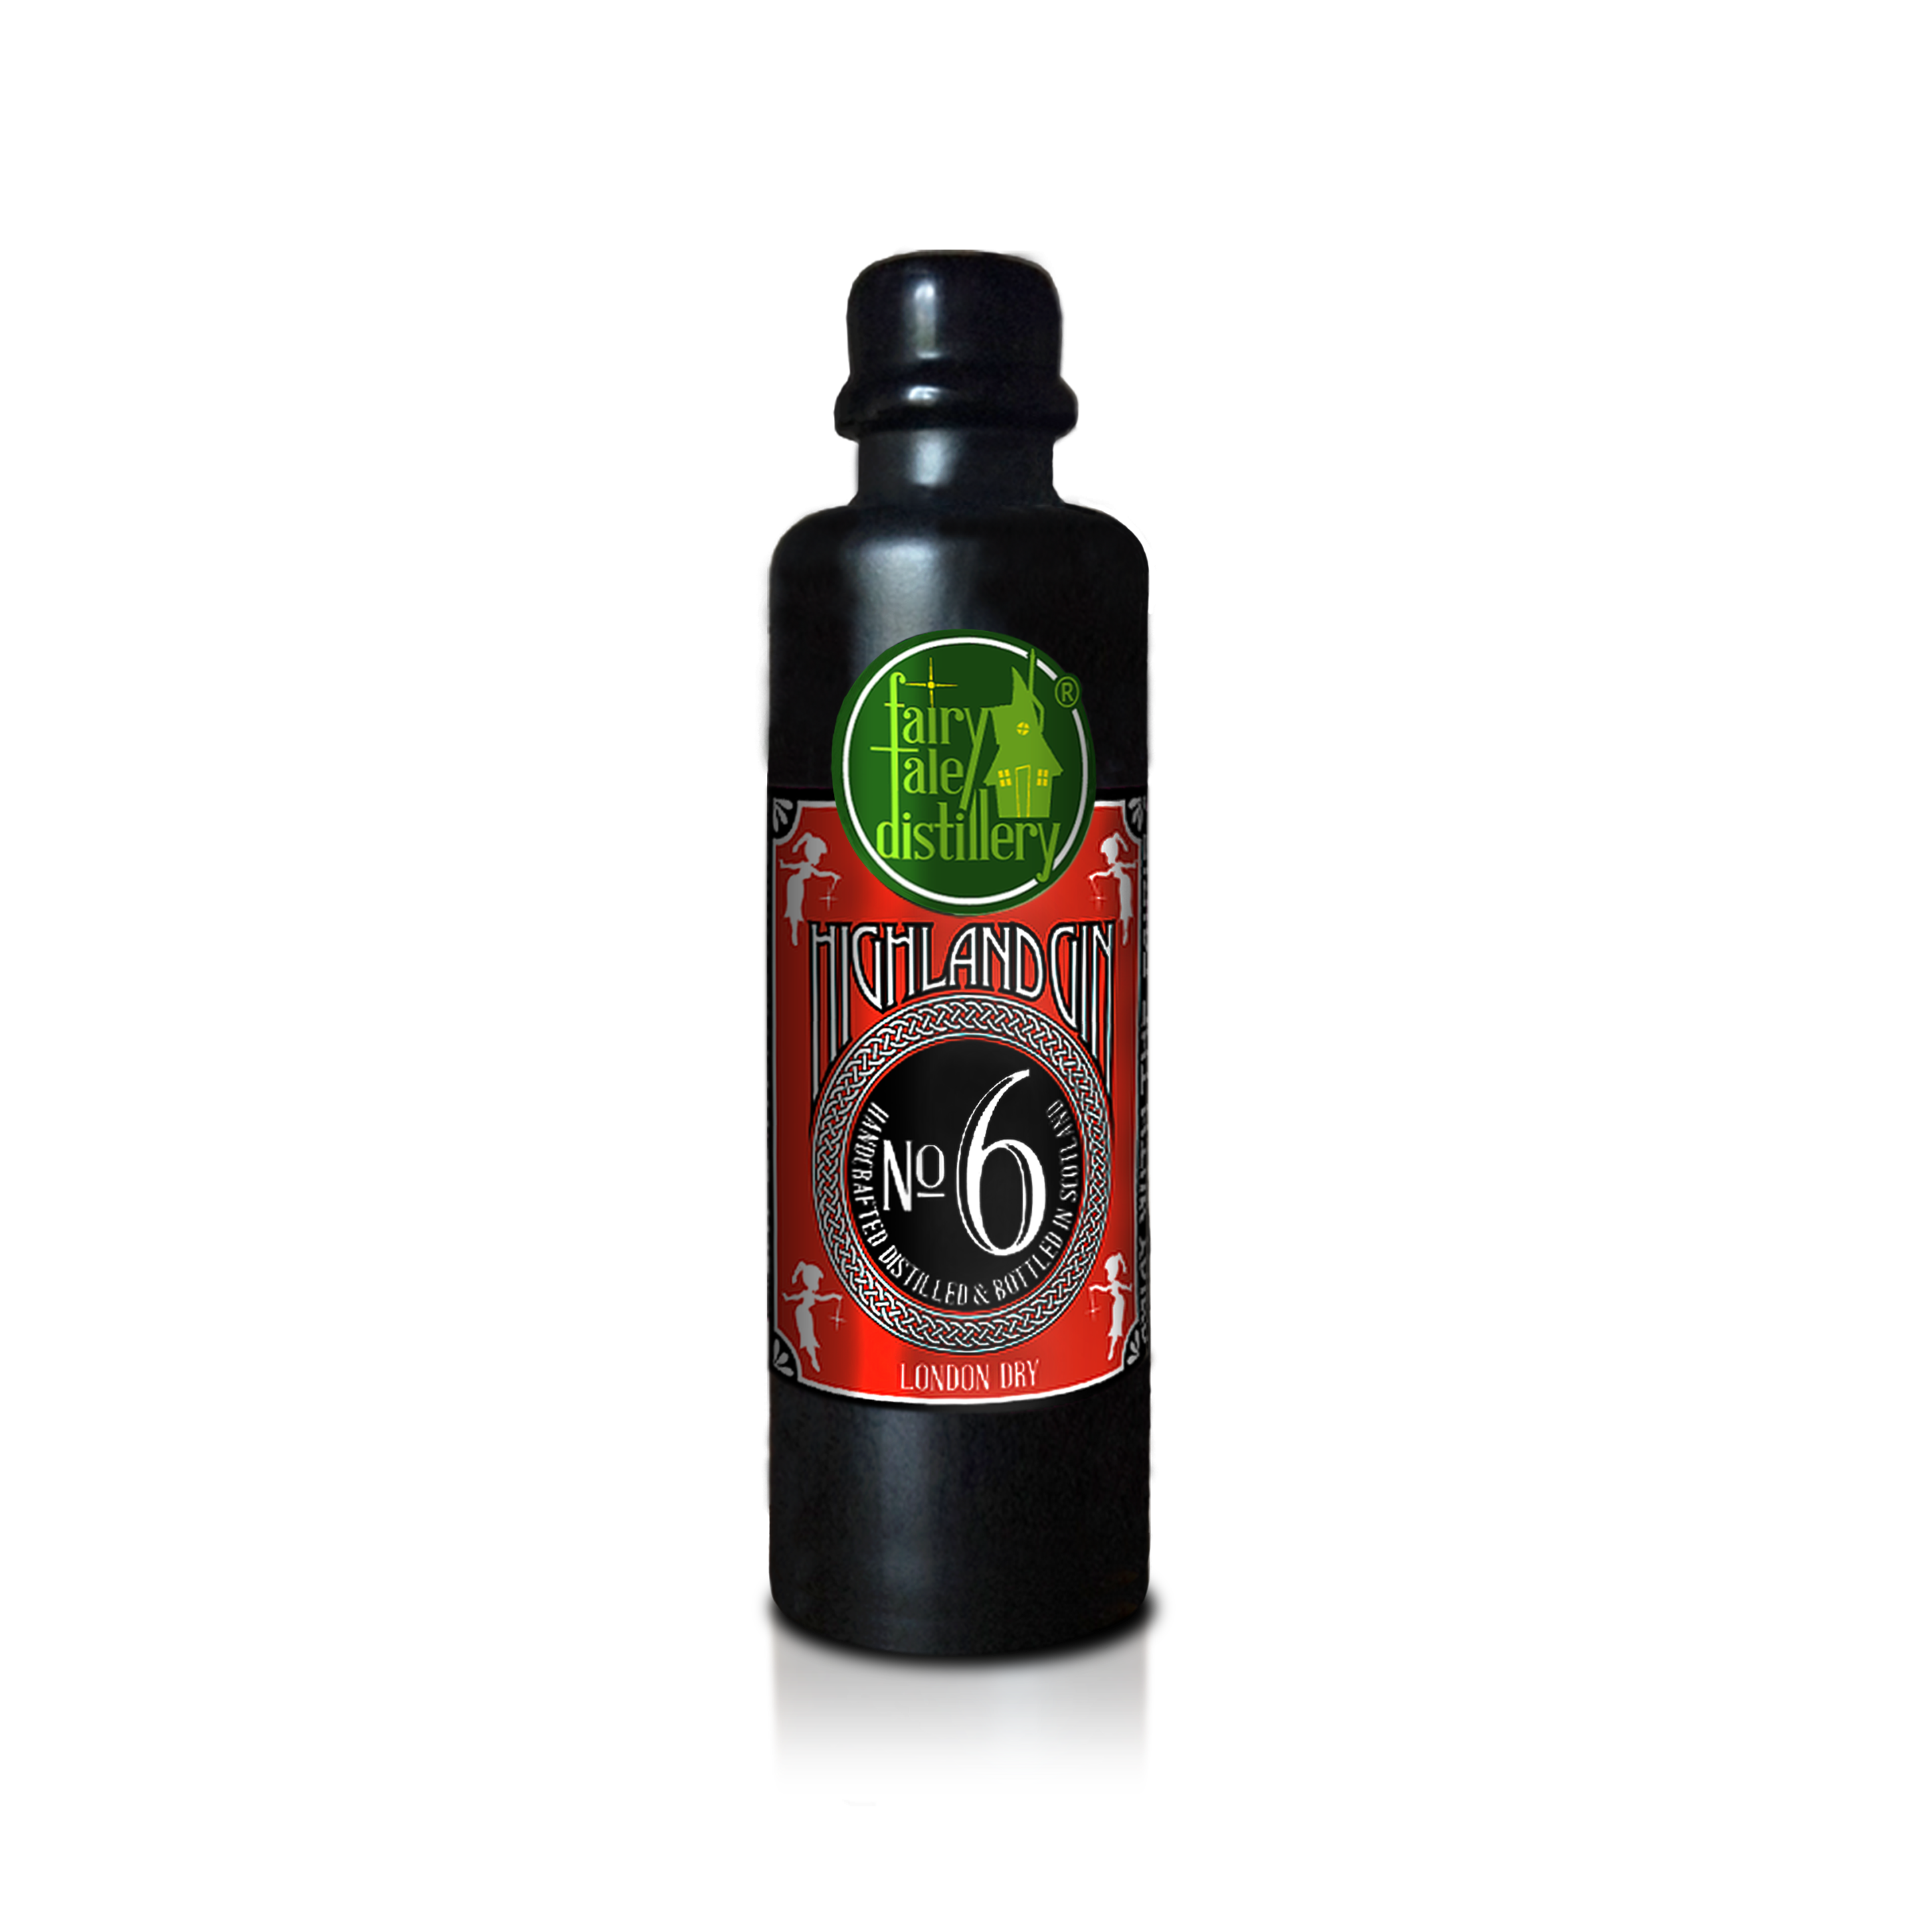 No 6 London Dry Highland Gin bottle 0,2l from Fairytale Distillery